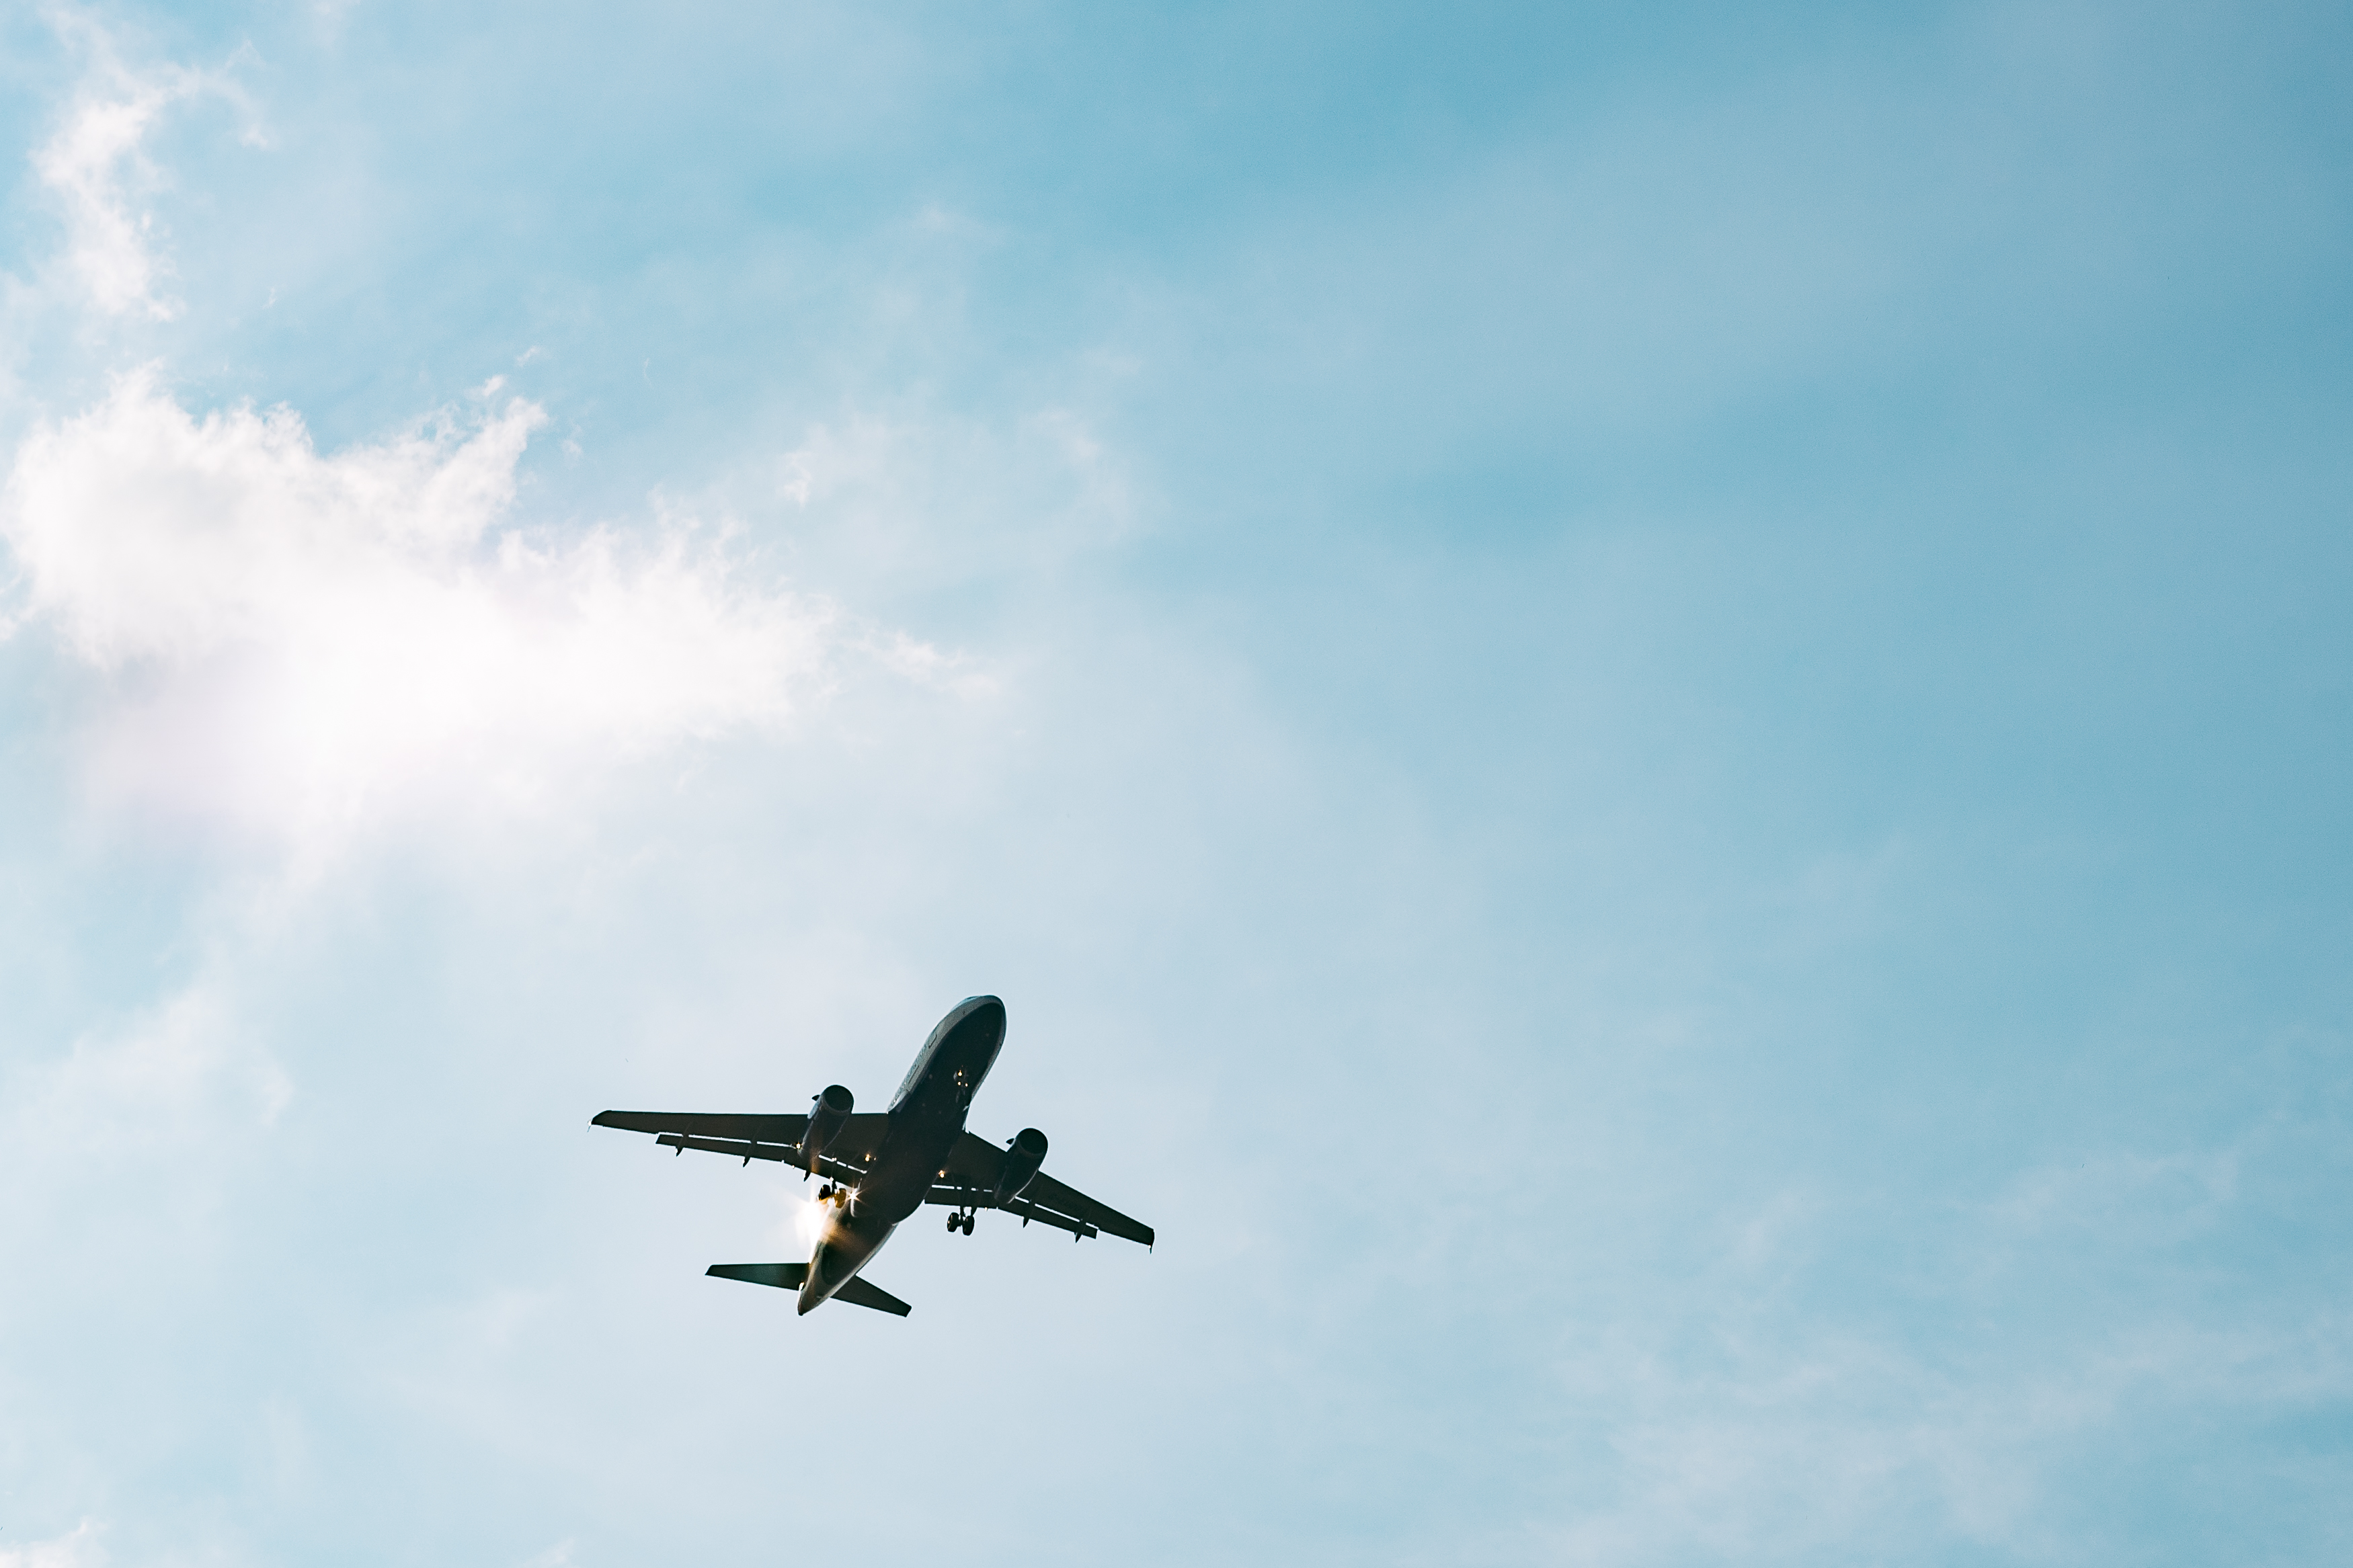 Airplane in the skies – free photo on Barnimages